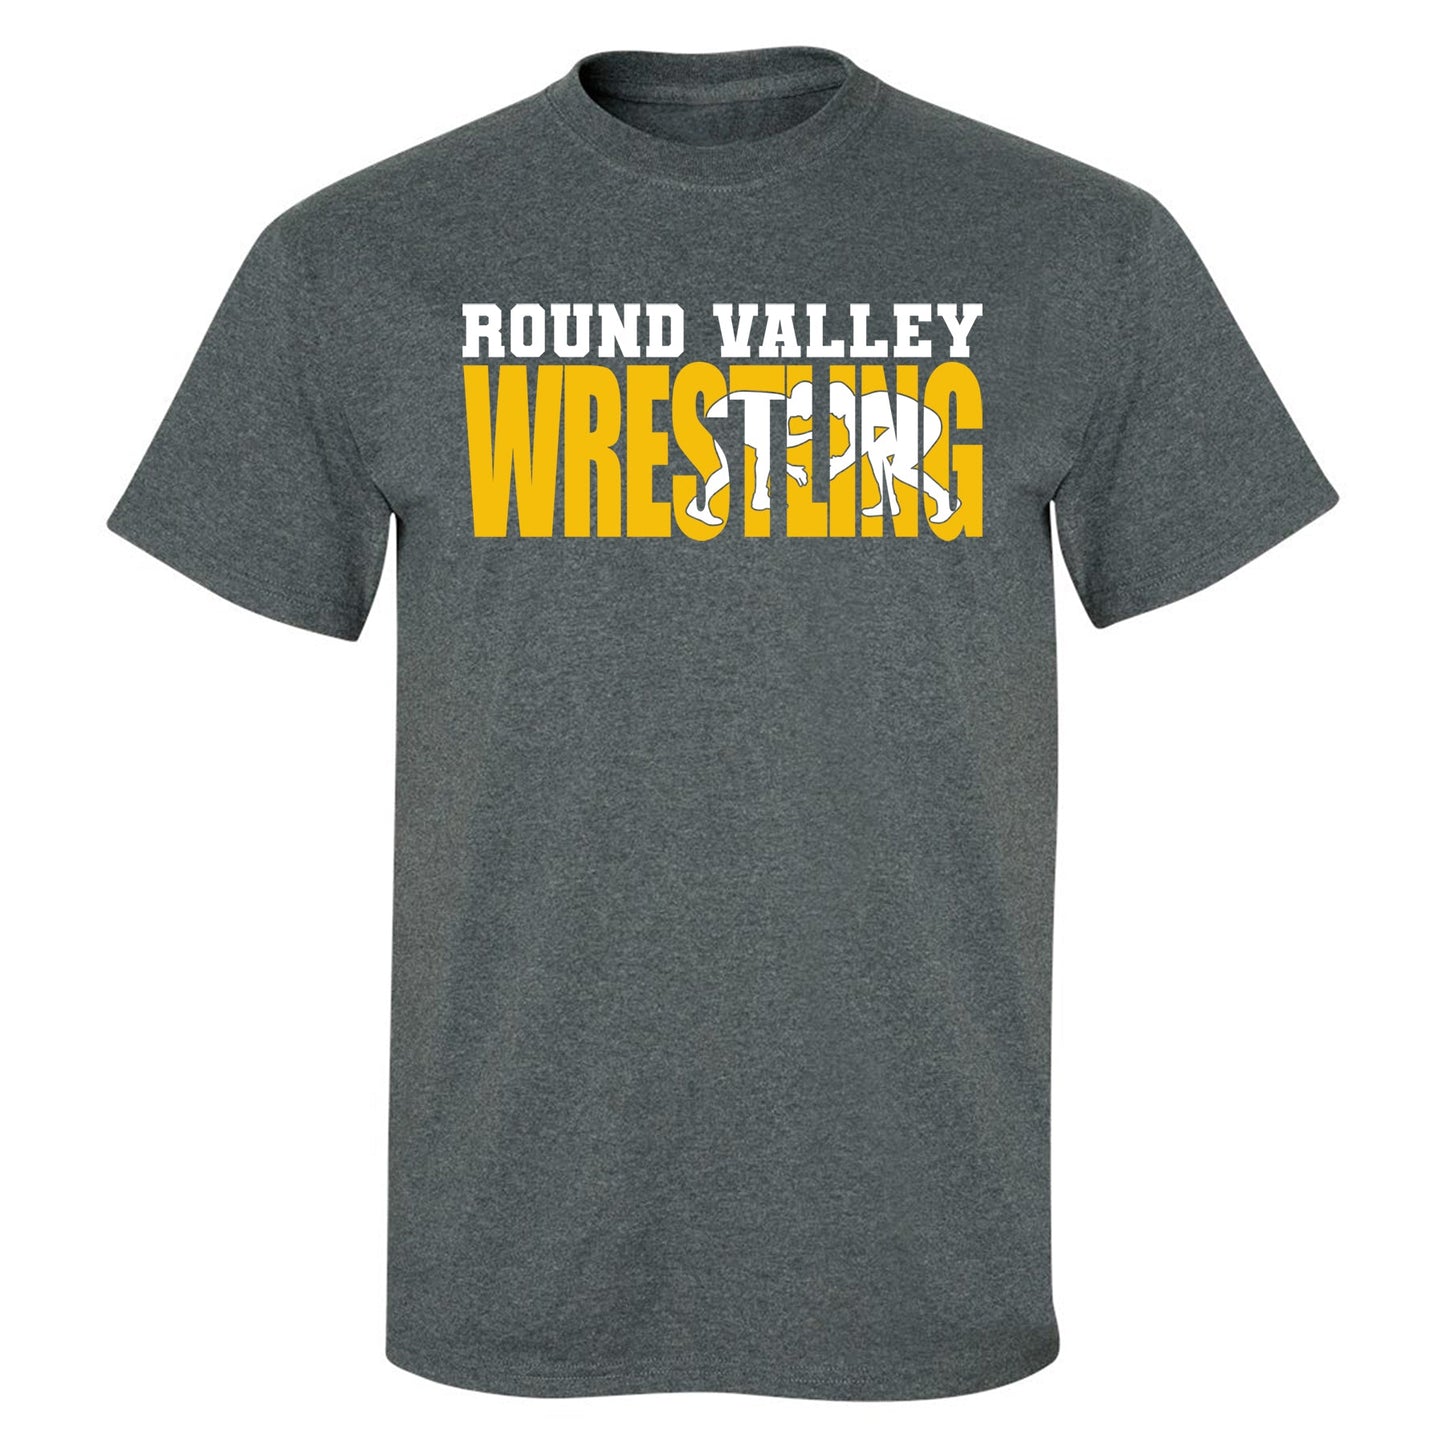 Round Valley Wrestling in Text - YOUTH